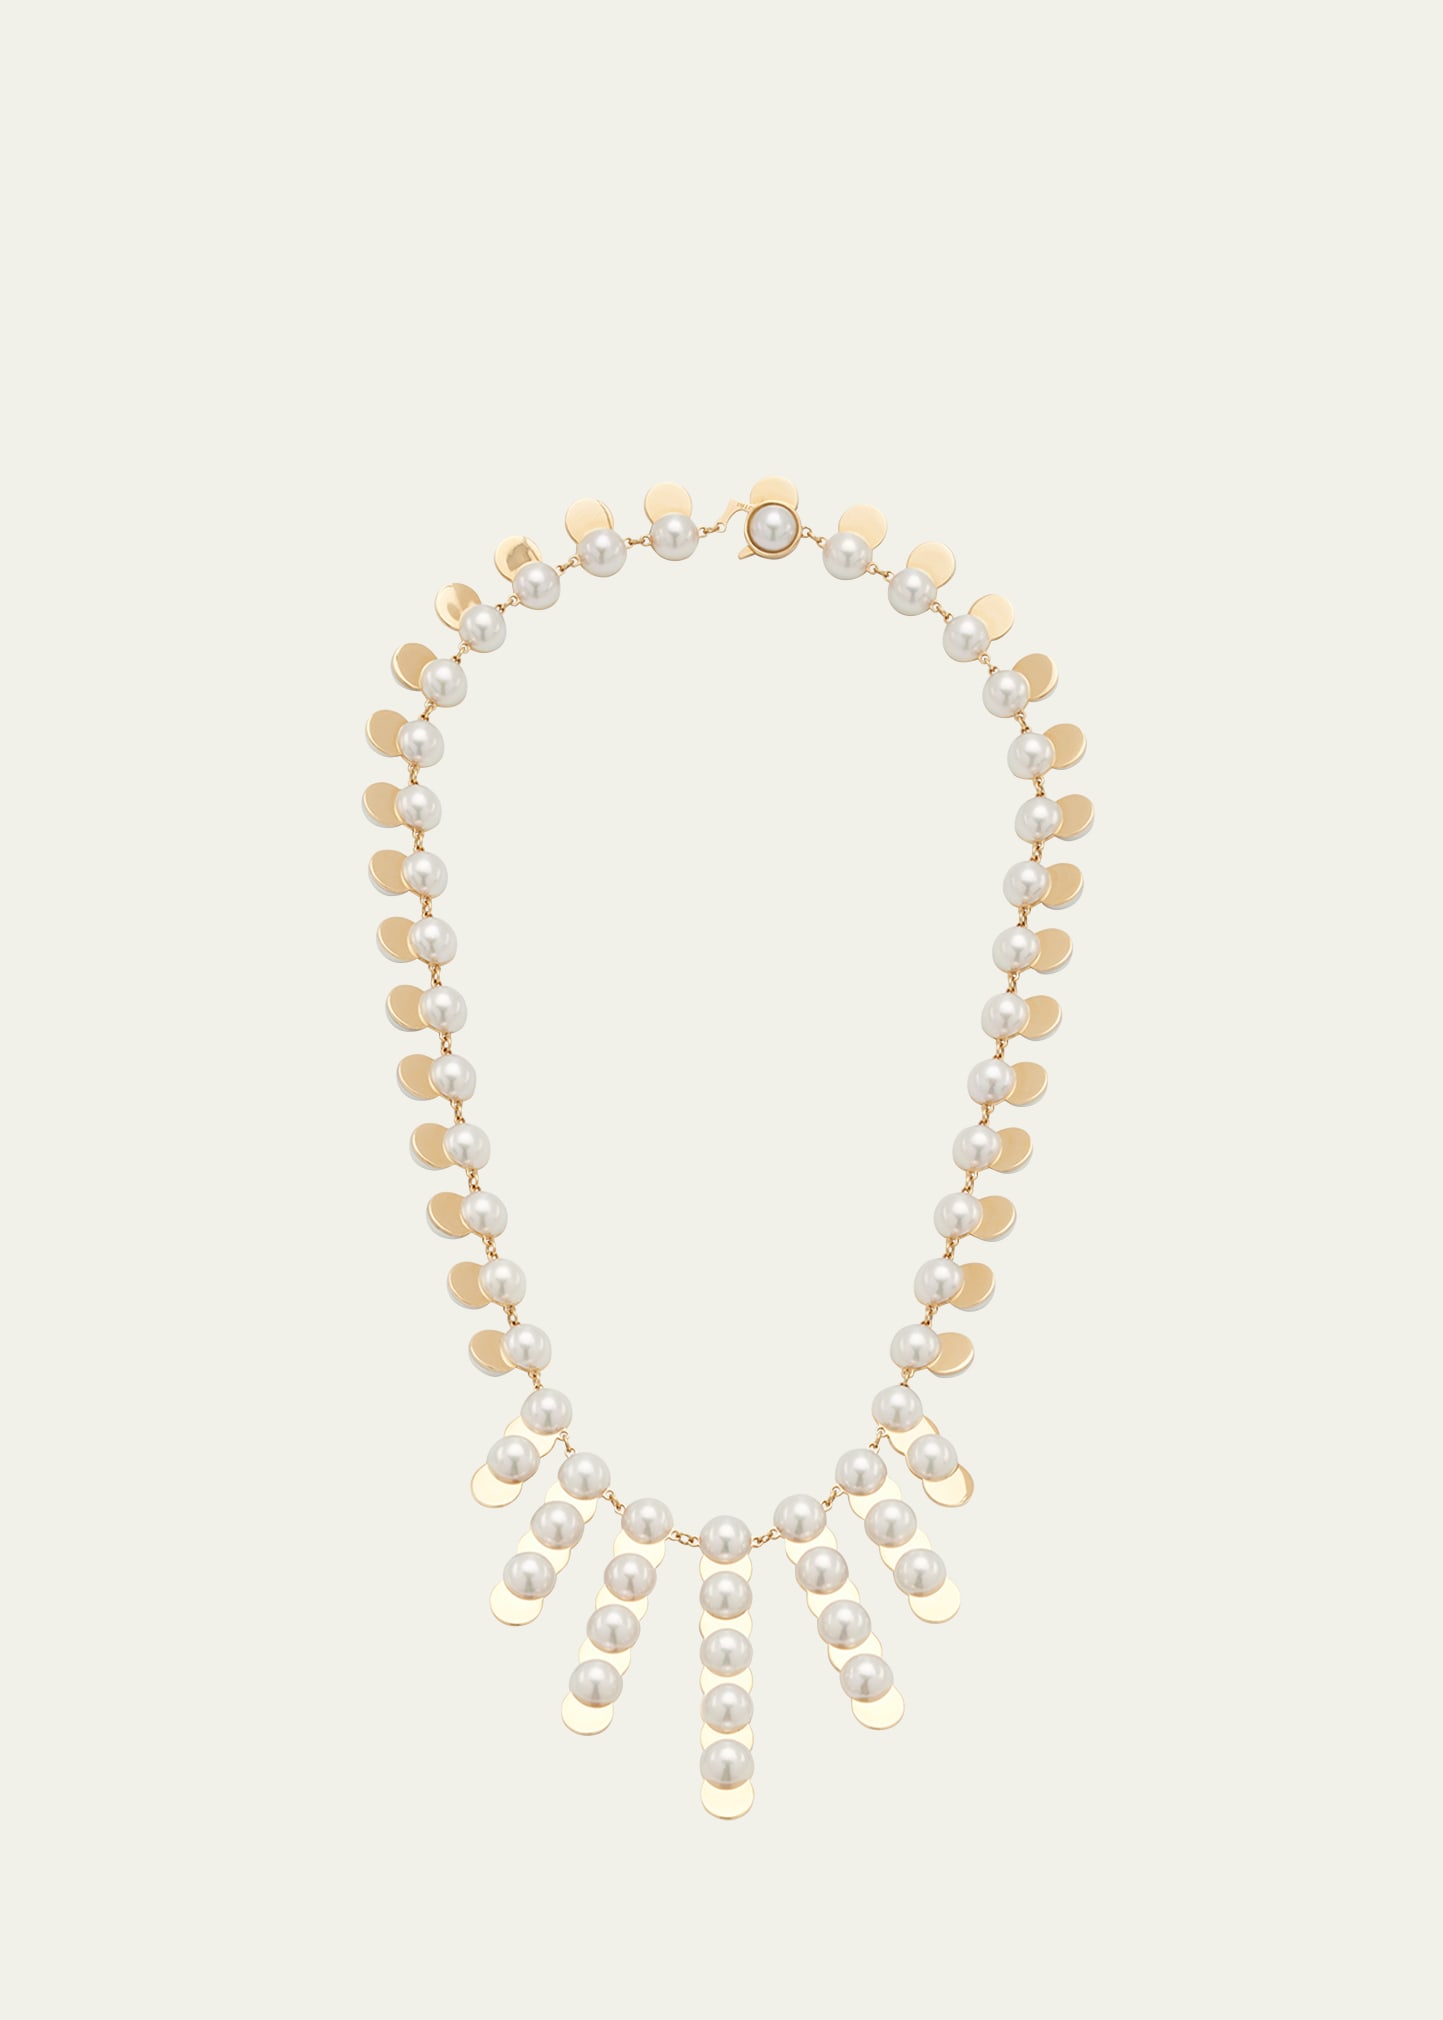 Slide Necklace with Akoya Pearls and 18K Gold